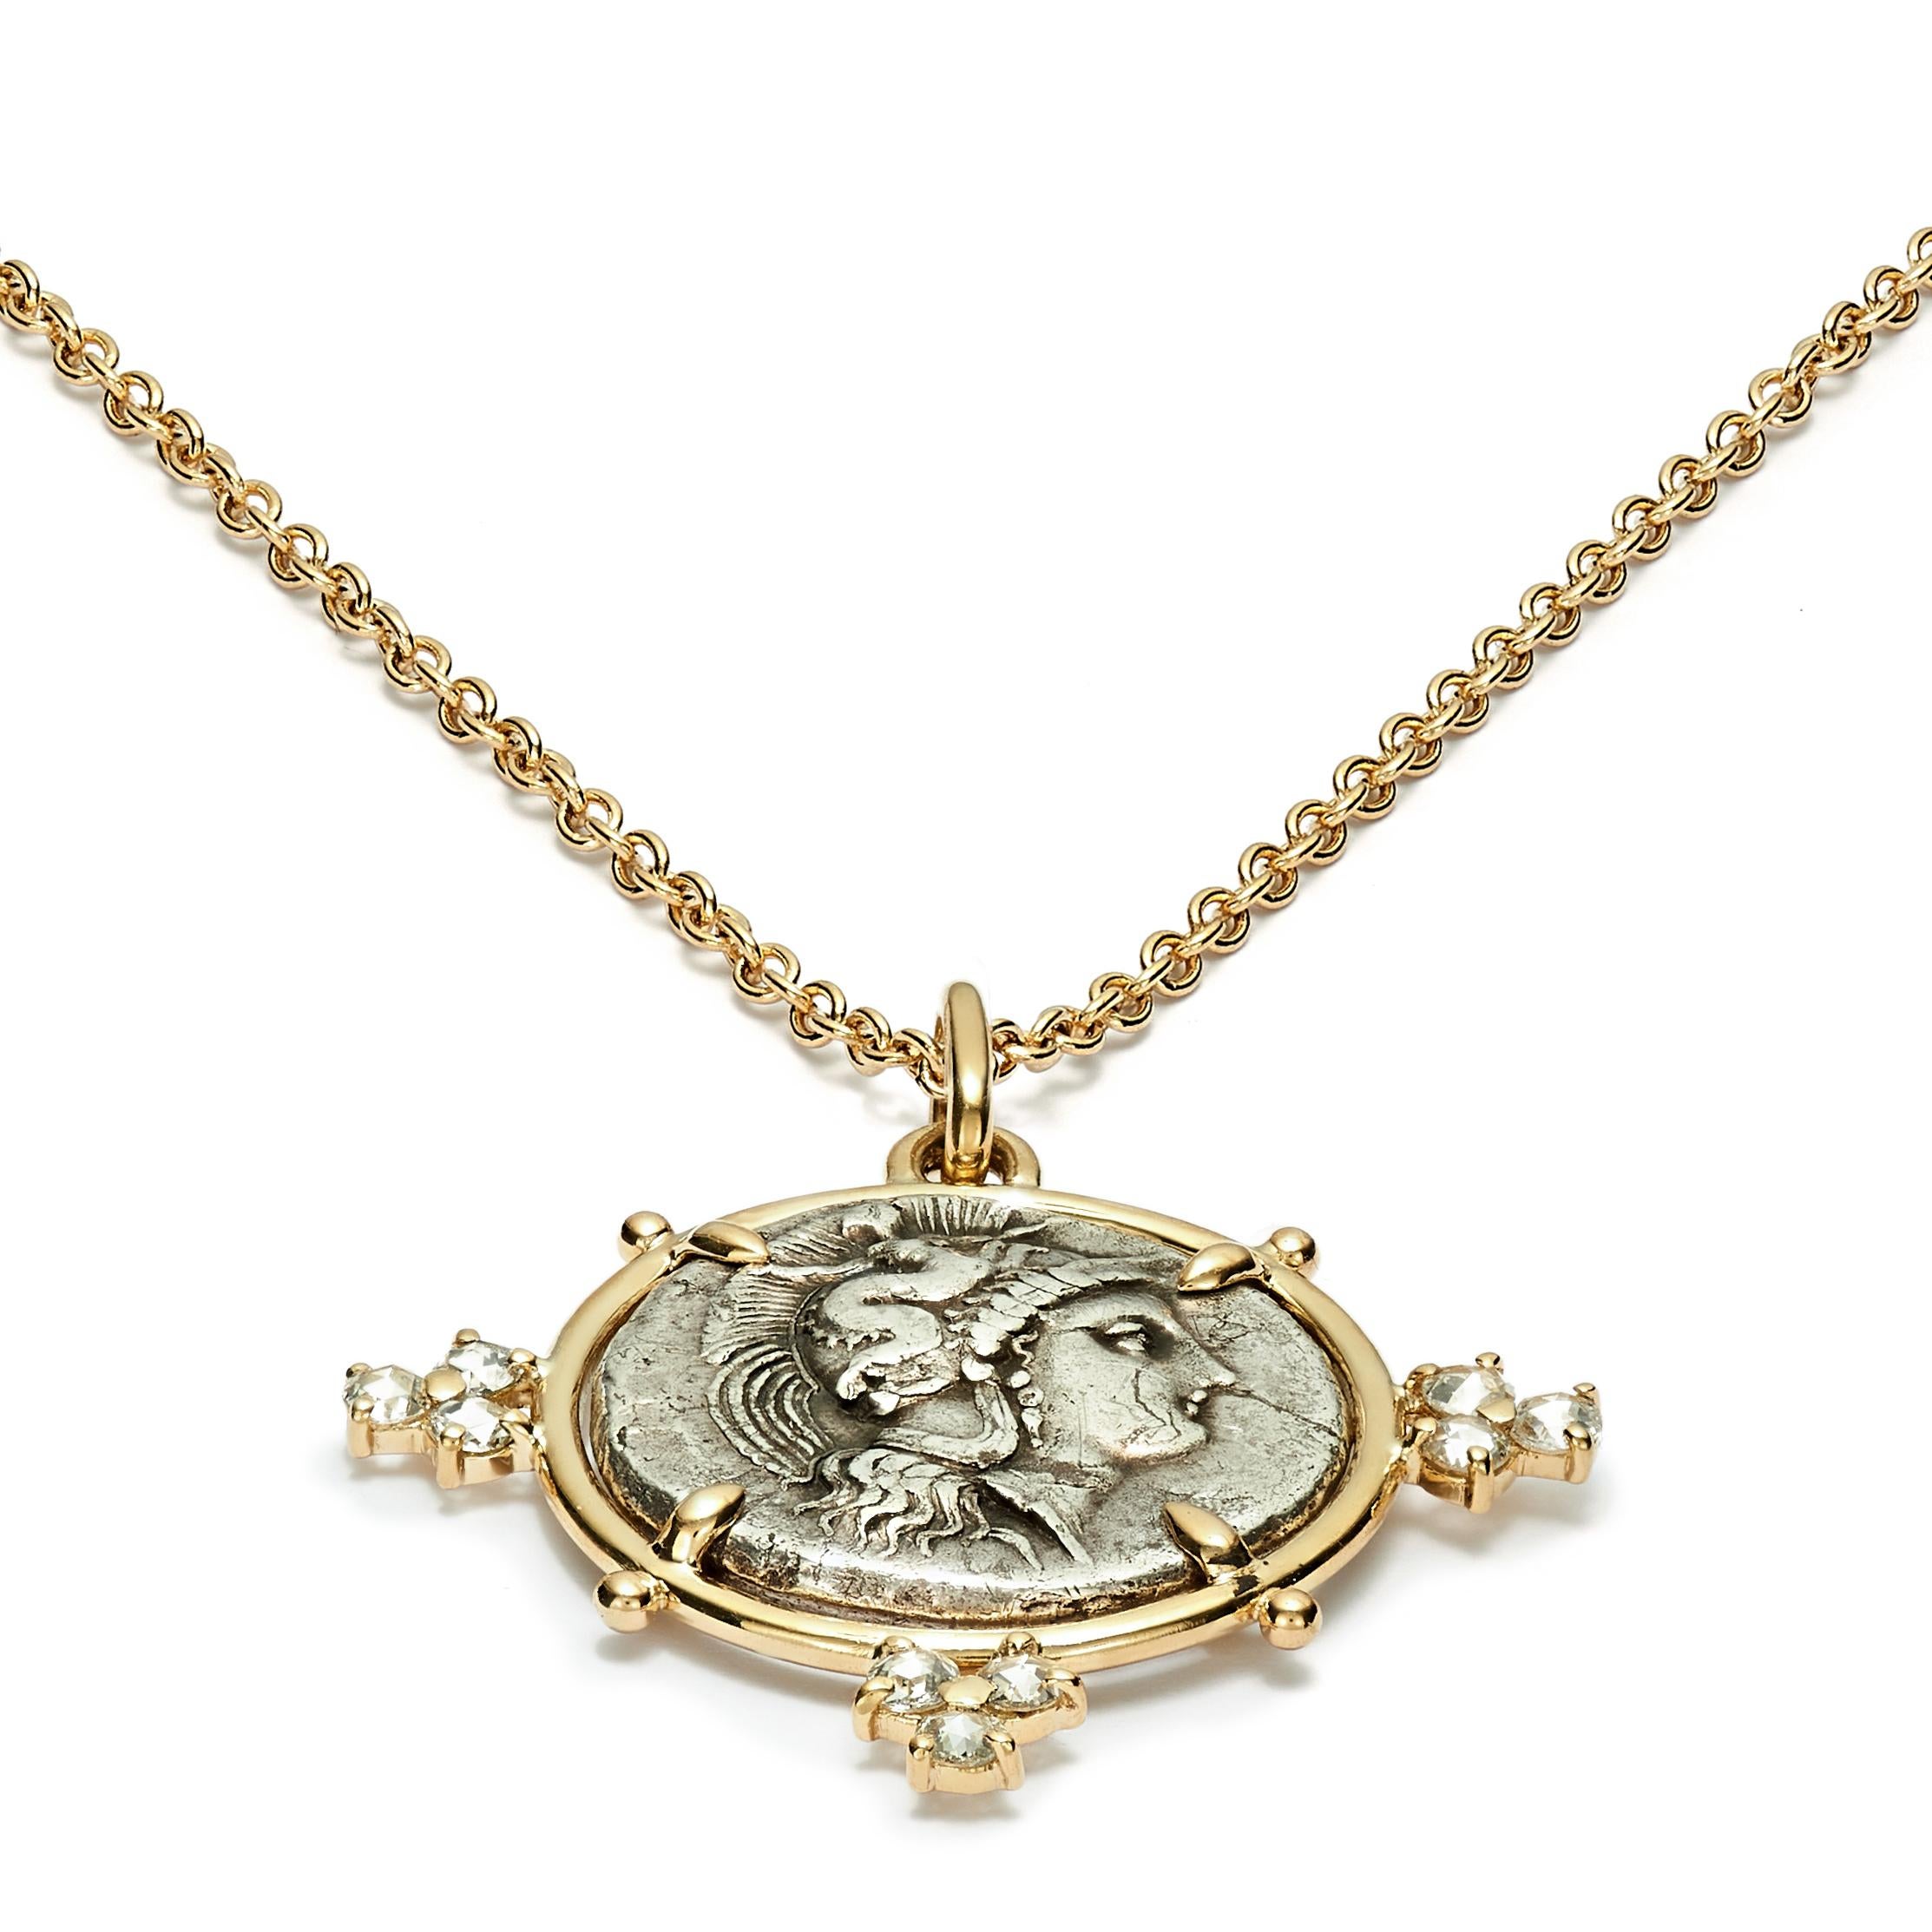 This DUBINI coin necklace from the 'Empires' collection features an authentic silver coin from Heraclea, Lucania dating circa 350 B.C. set in 18kt yellow gold with rose-cut diamonds.

Depicted on the coin: 
Obverse - Head of Athena right, in